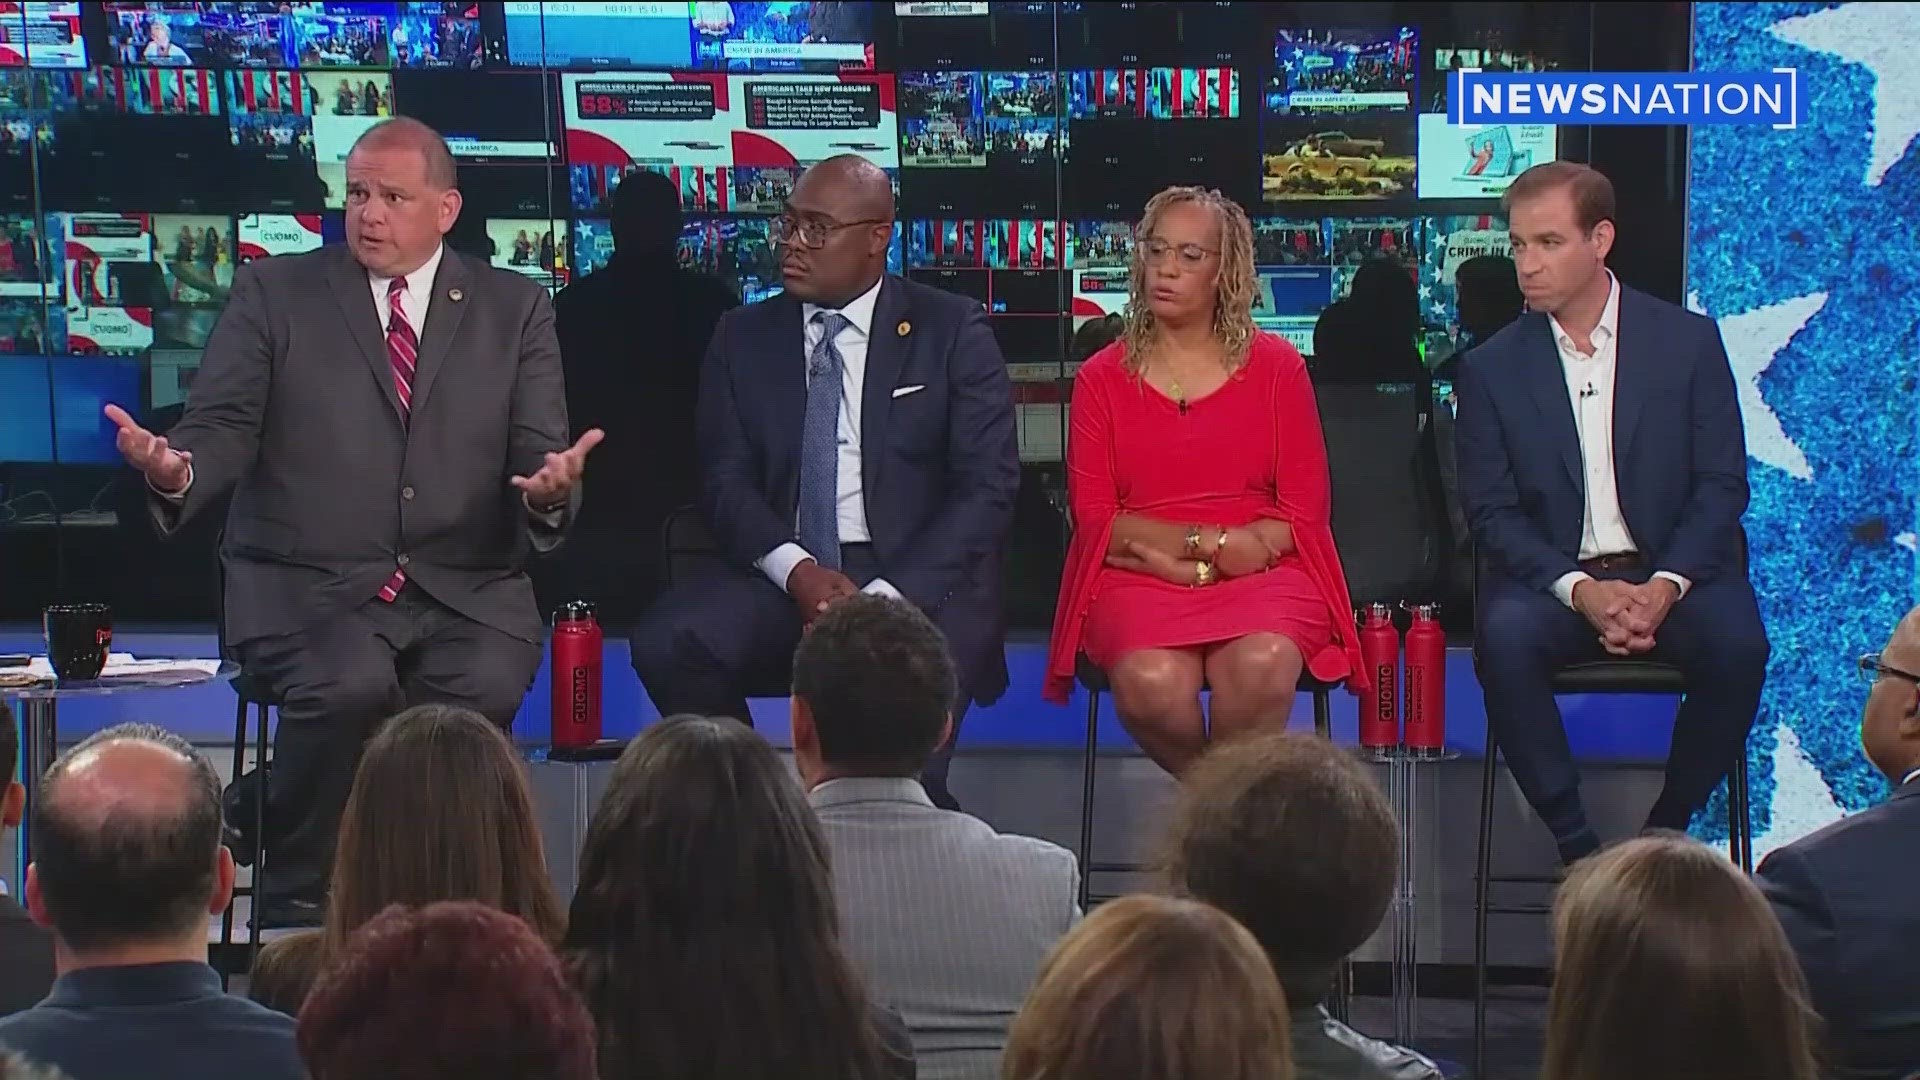 Mayor Wade Kapszukiewicz joined 'Chris Cuomo' as a guest in a town hall style forum. He discussed gun violence and the approach his team has taken to reduce crime.